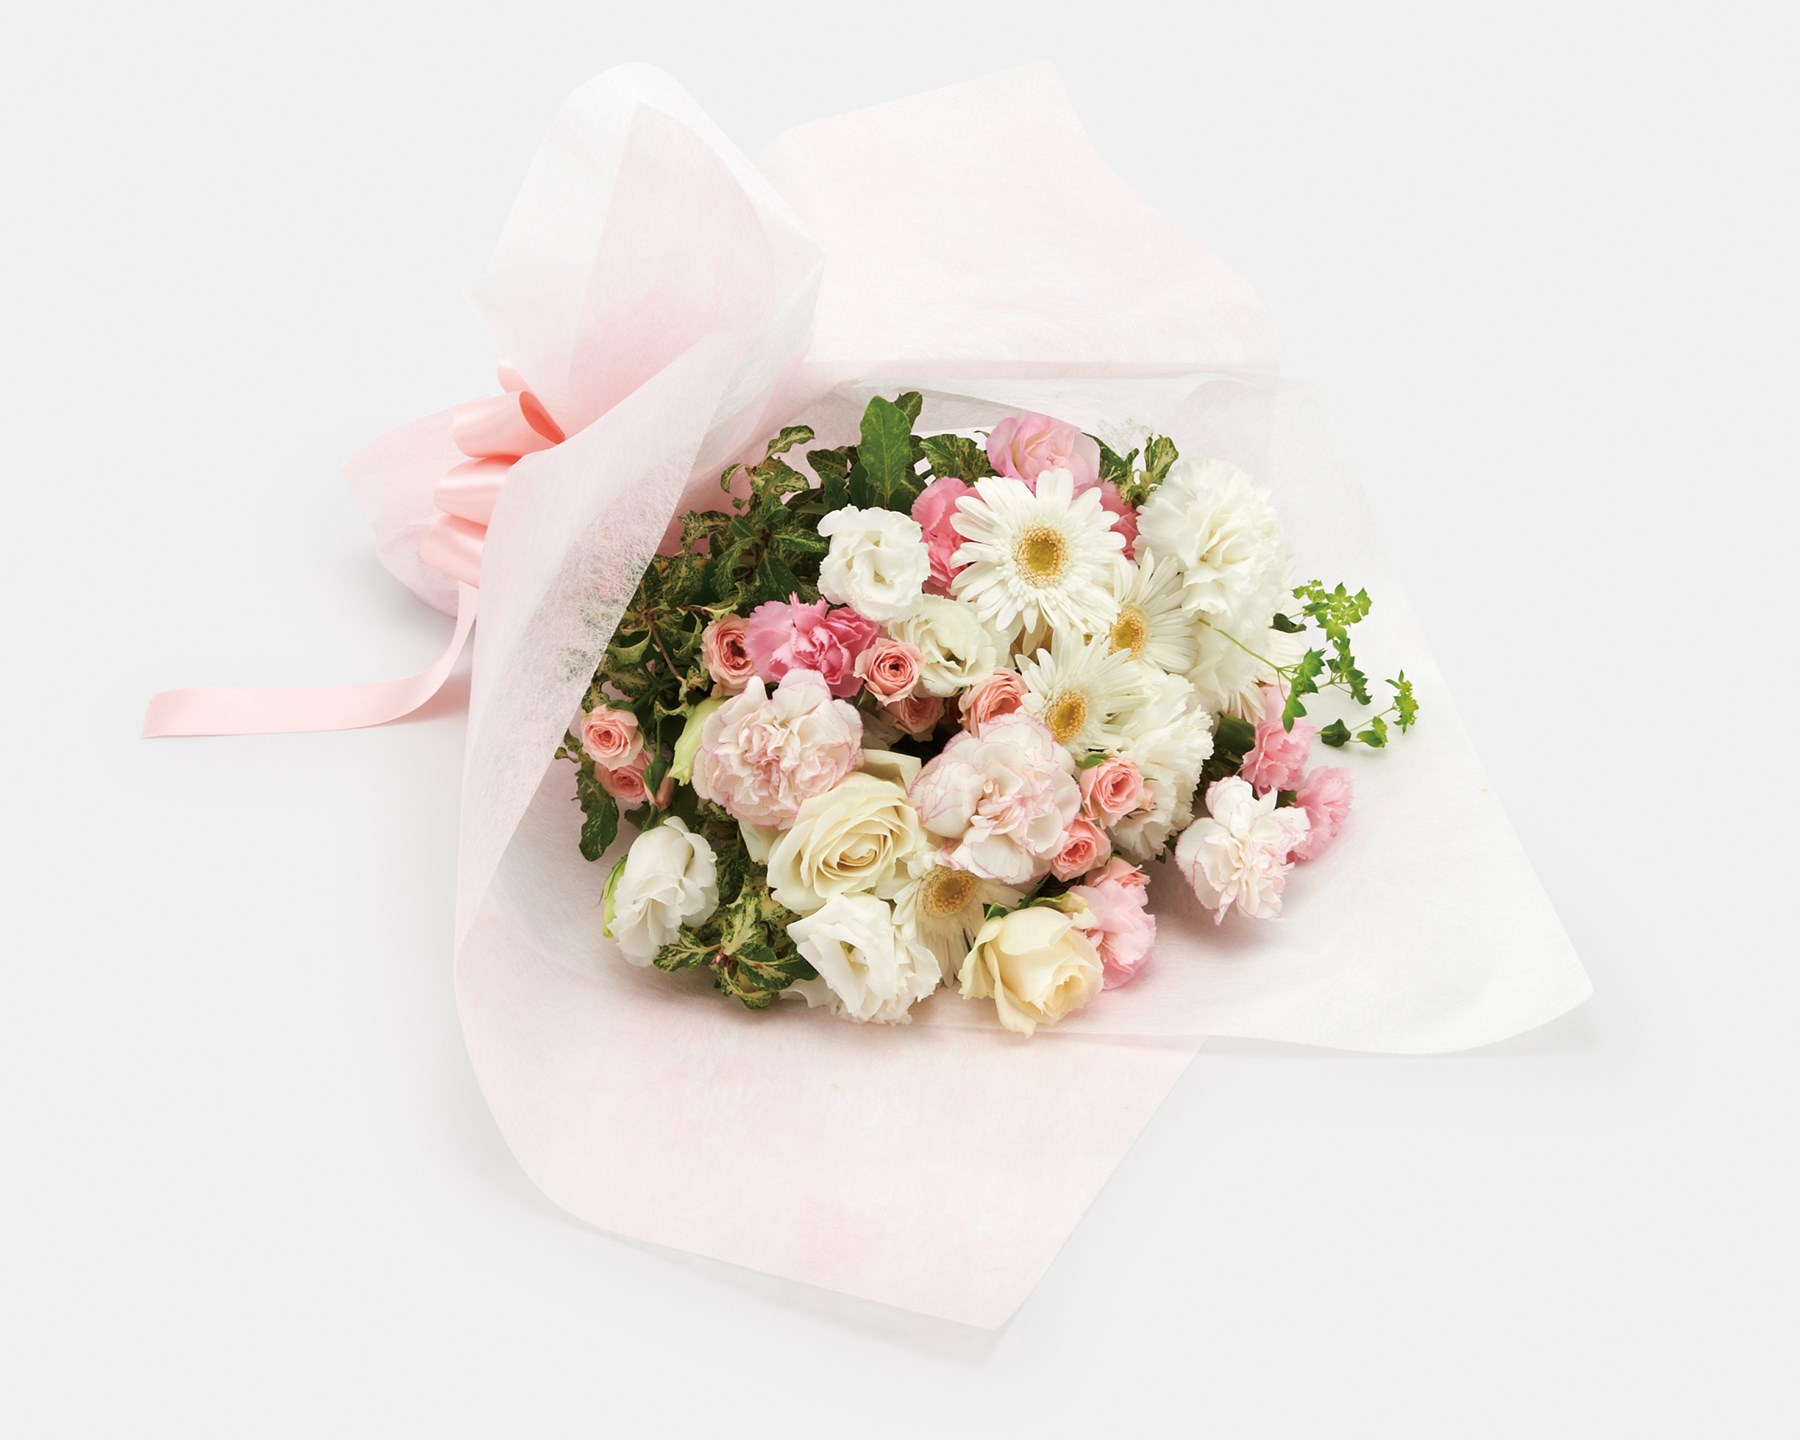 product image for Mothers Day white and pink hand-tied bouquet